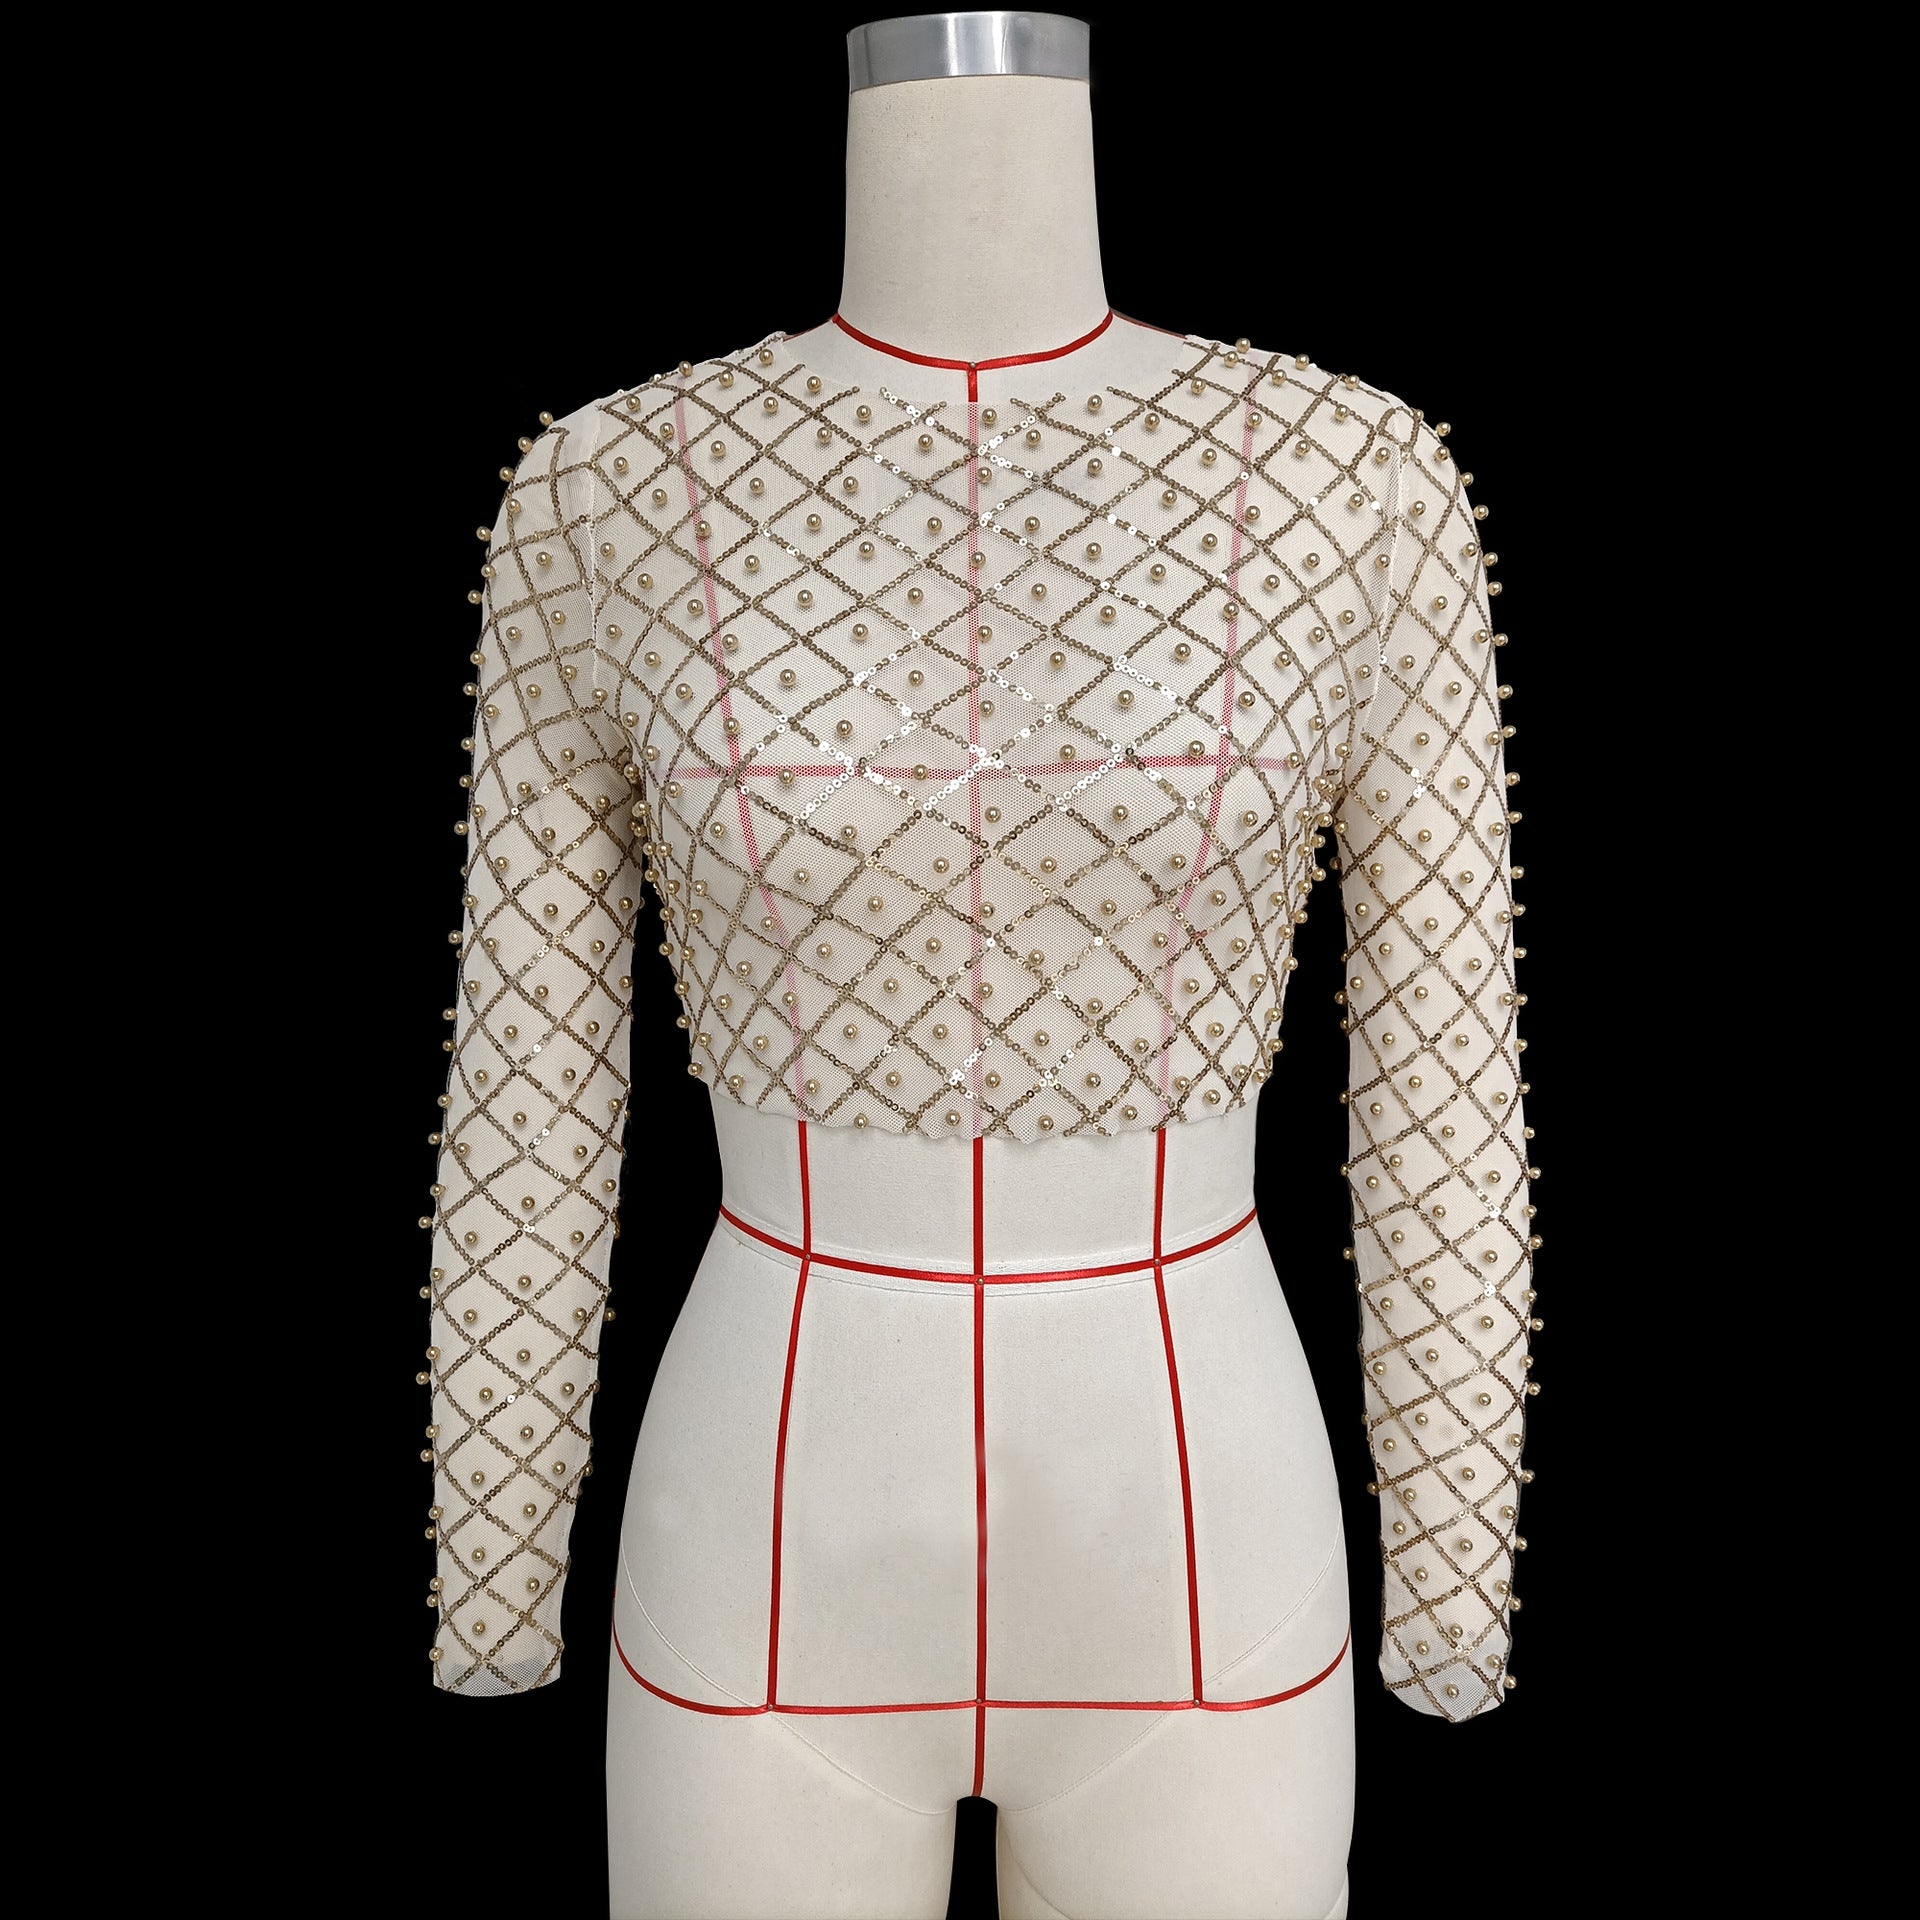 A mannequin wearing the Maramalive™ Mesh Studded Sequin Long-sleeved Shirt showcases celebrity style. Made of polyester fiber, the top exudes elegance. The mannequin is marked with red lines to indicate measurements.